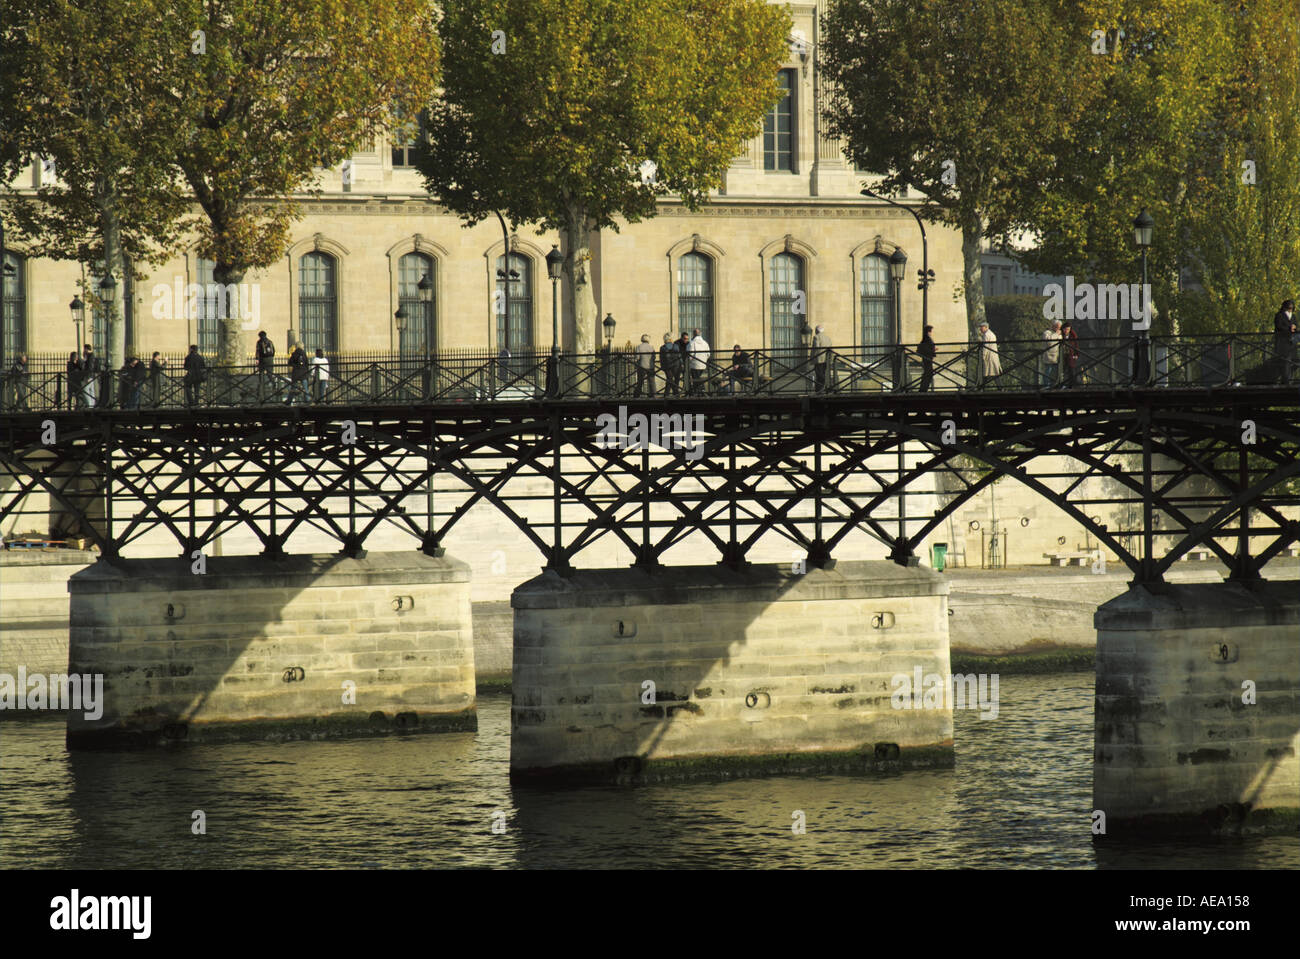 France Paris The Pont Des Arts On The Seine River Banks At Fall Stock Photo